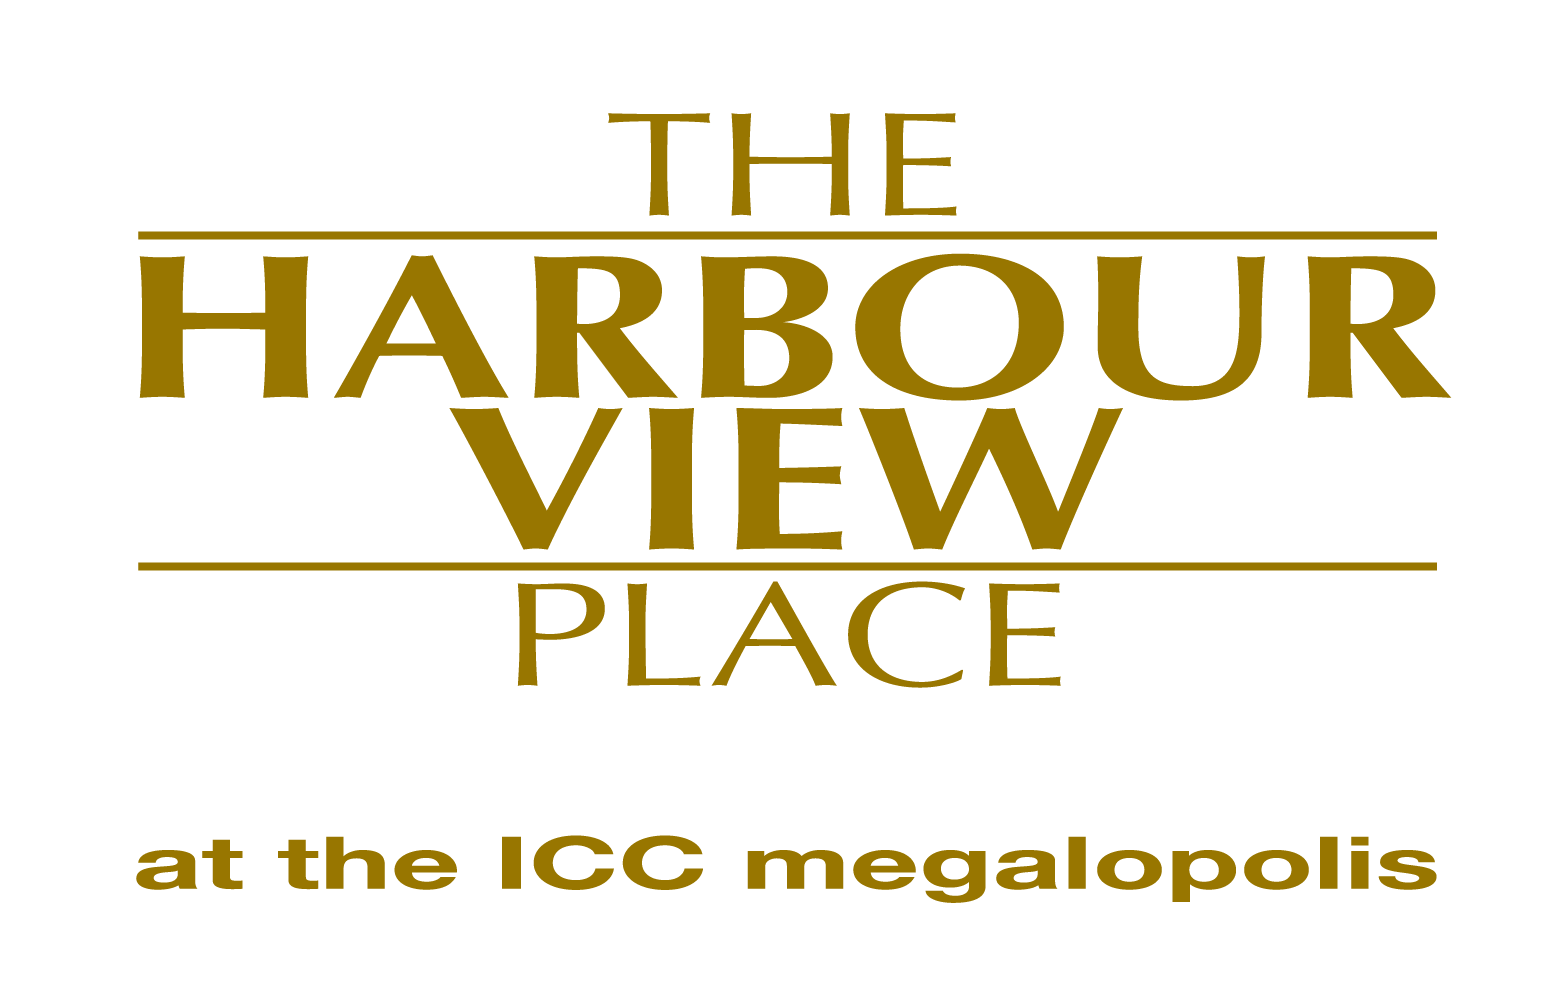 The Harbourview Place